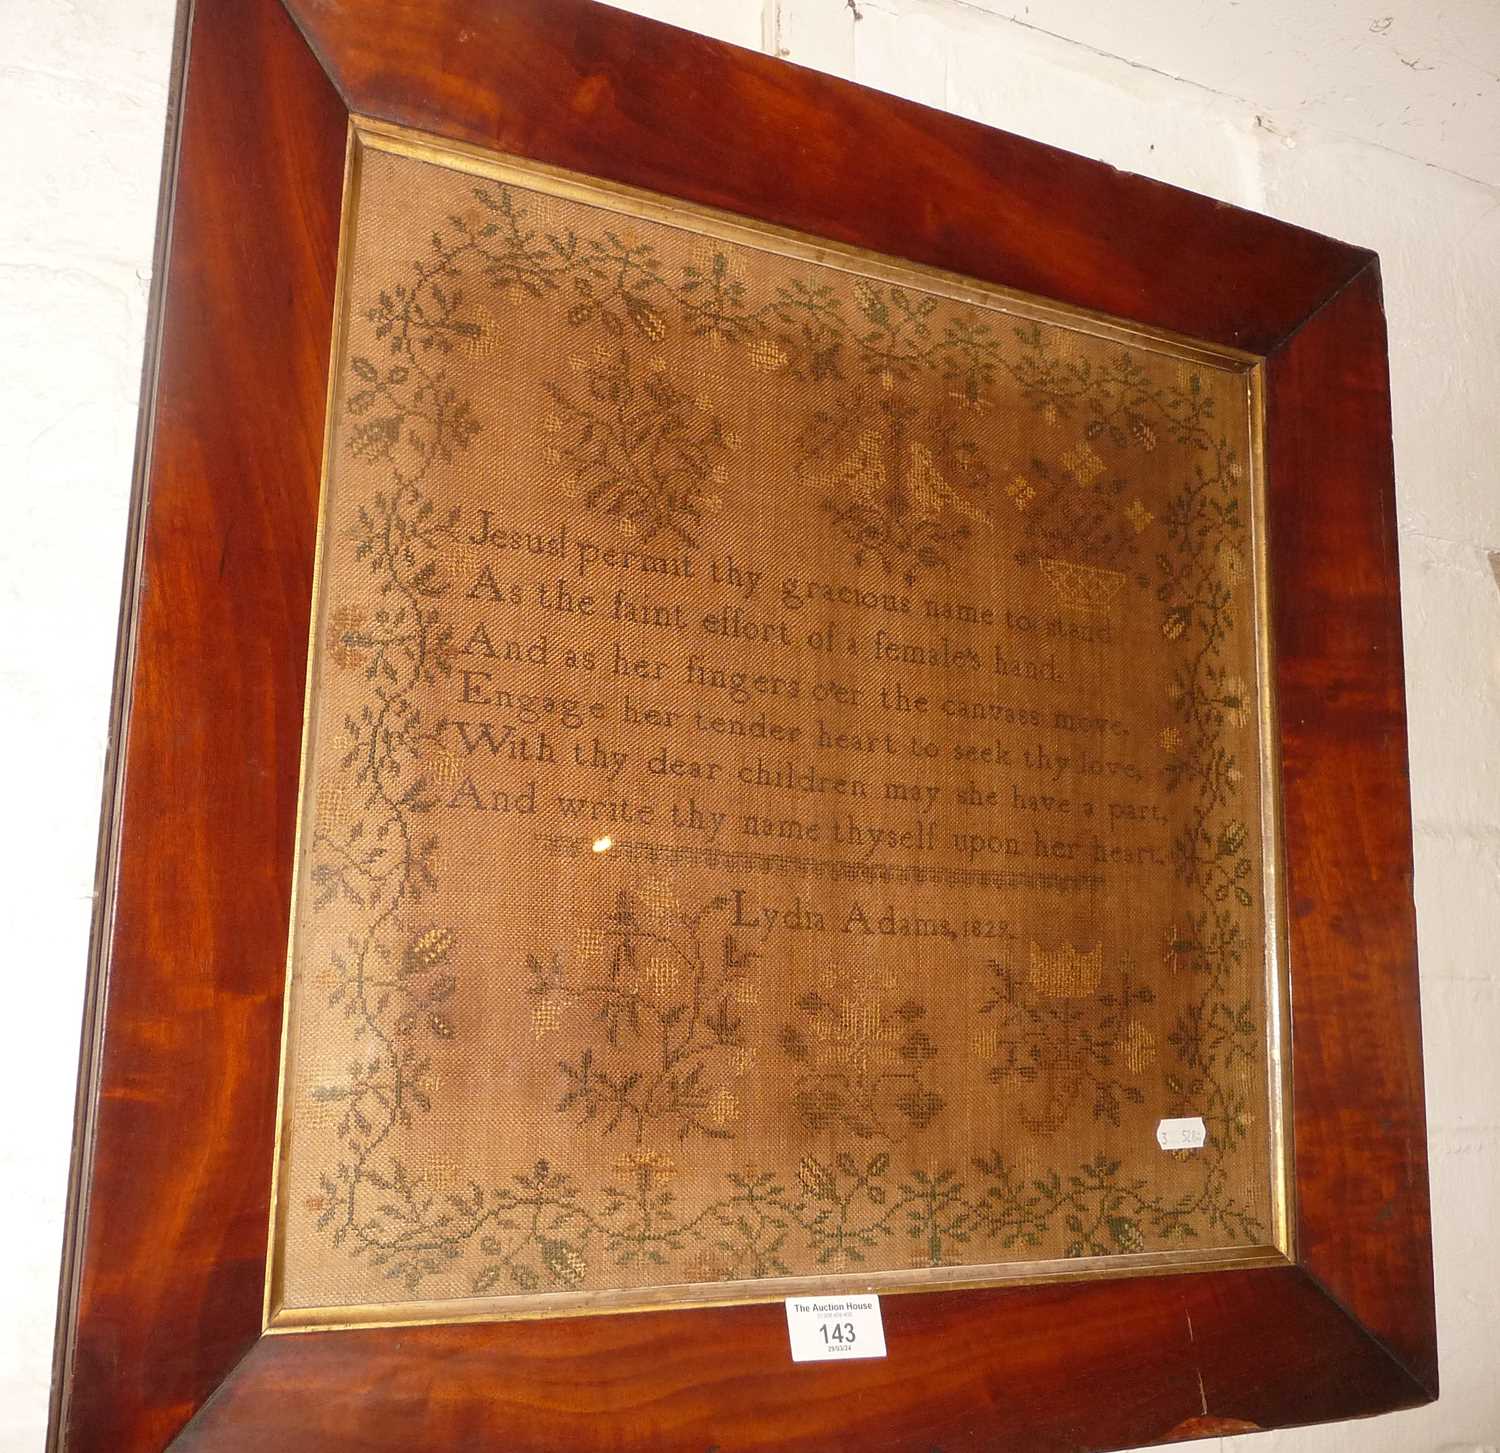 19th c. sampler by Lydia Adams 1829 in flame mahogany frame, 21" x 20" - Image 2 of 2